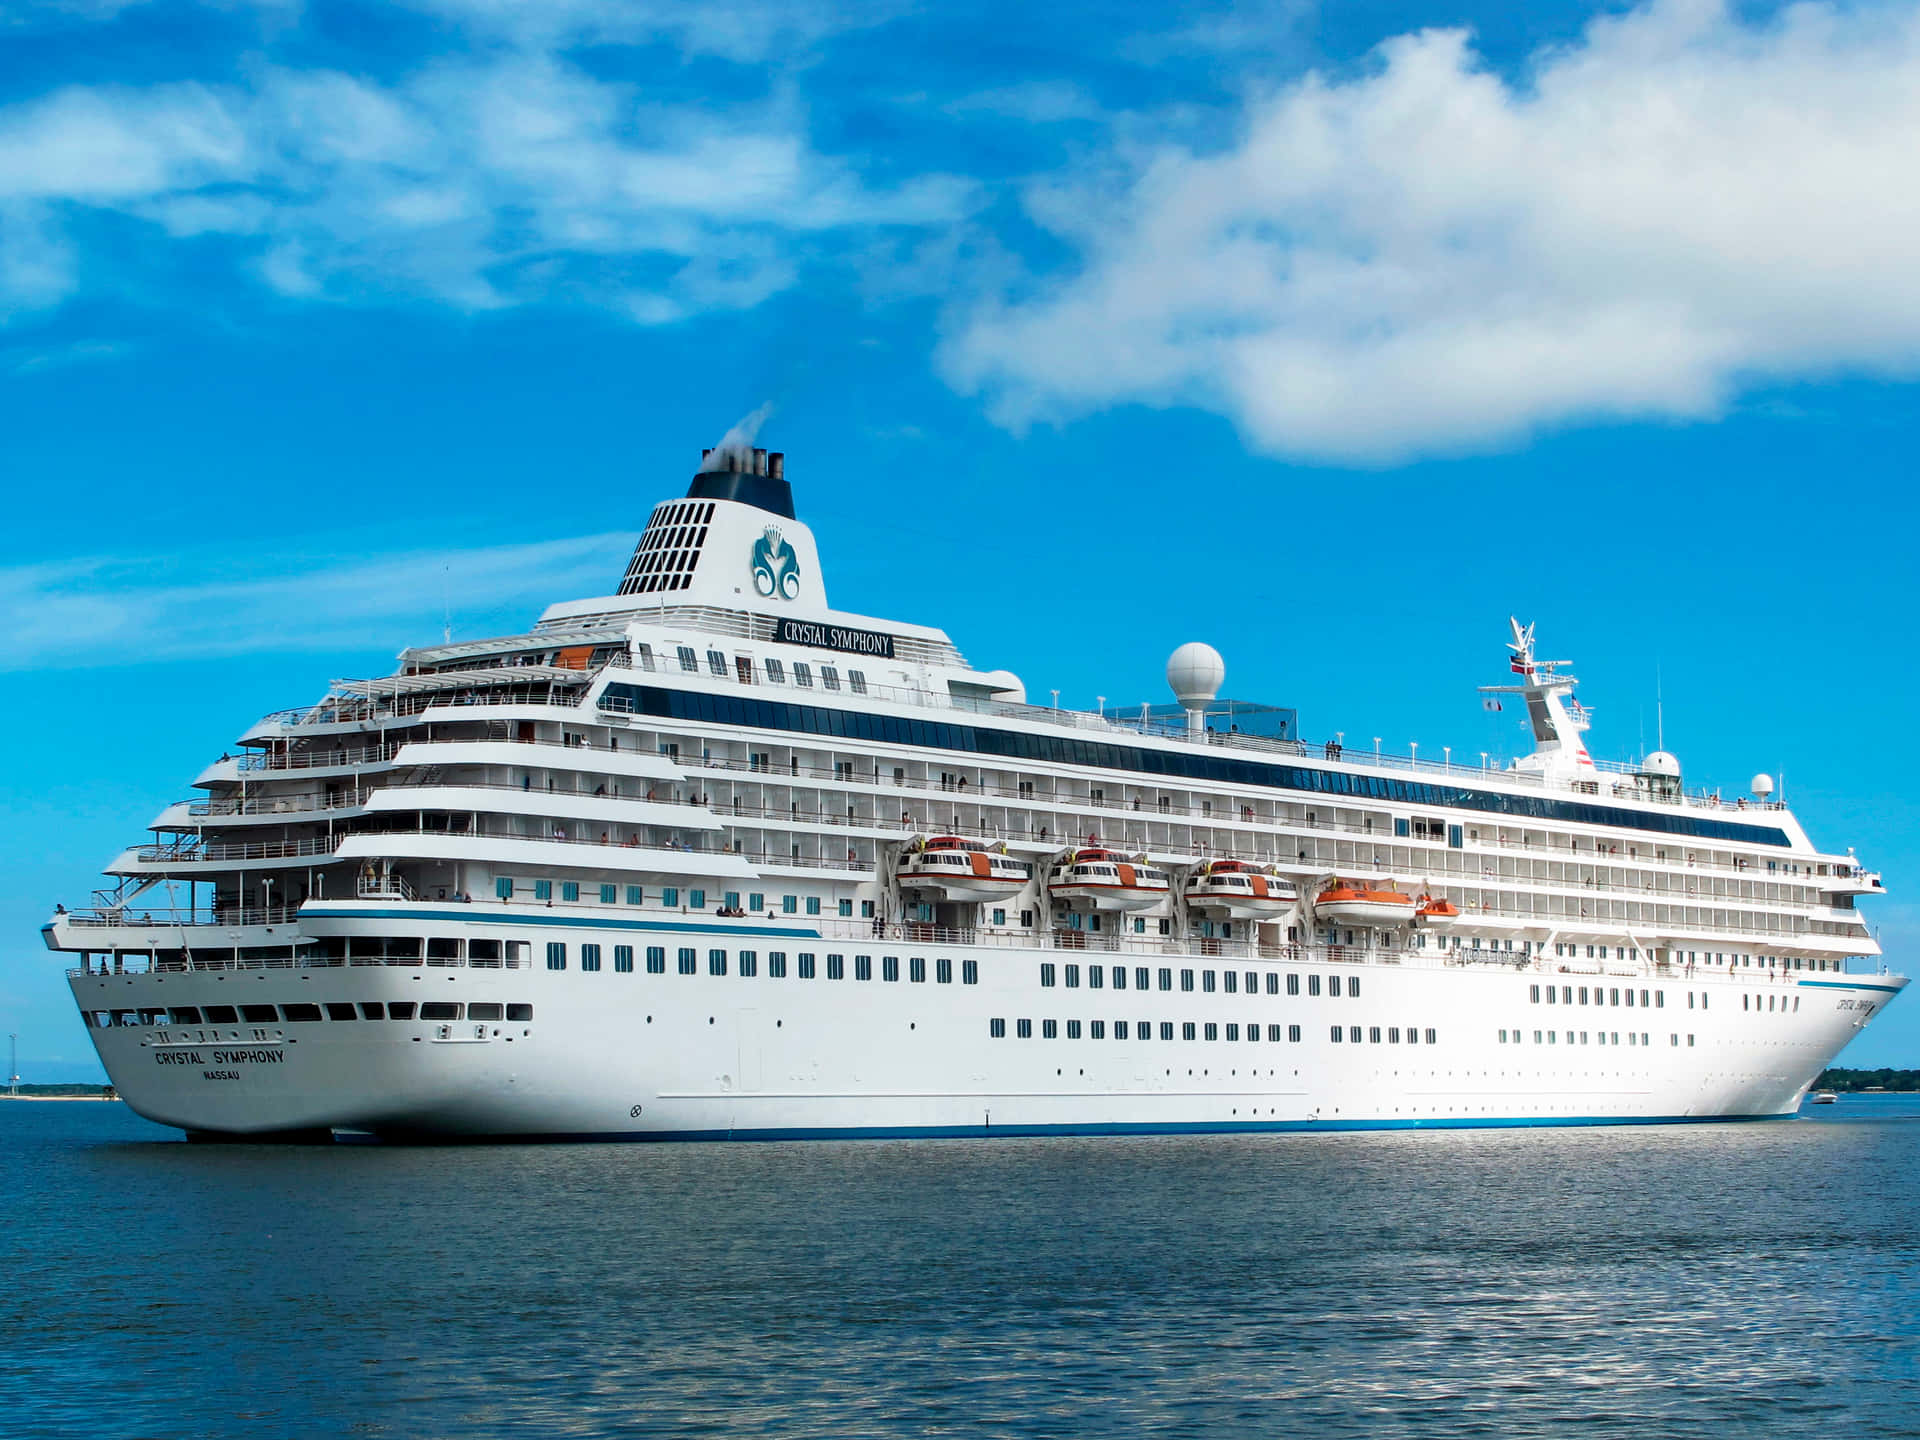 Witness the Magnificence of a Cruise Ship